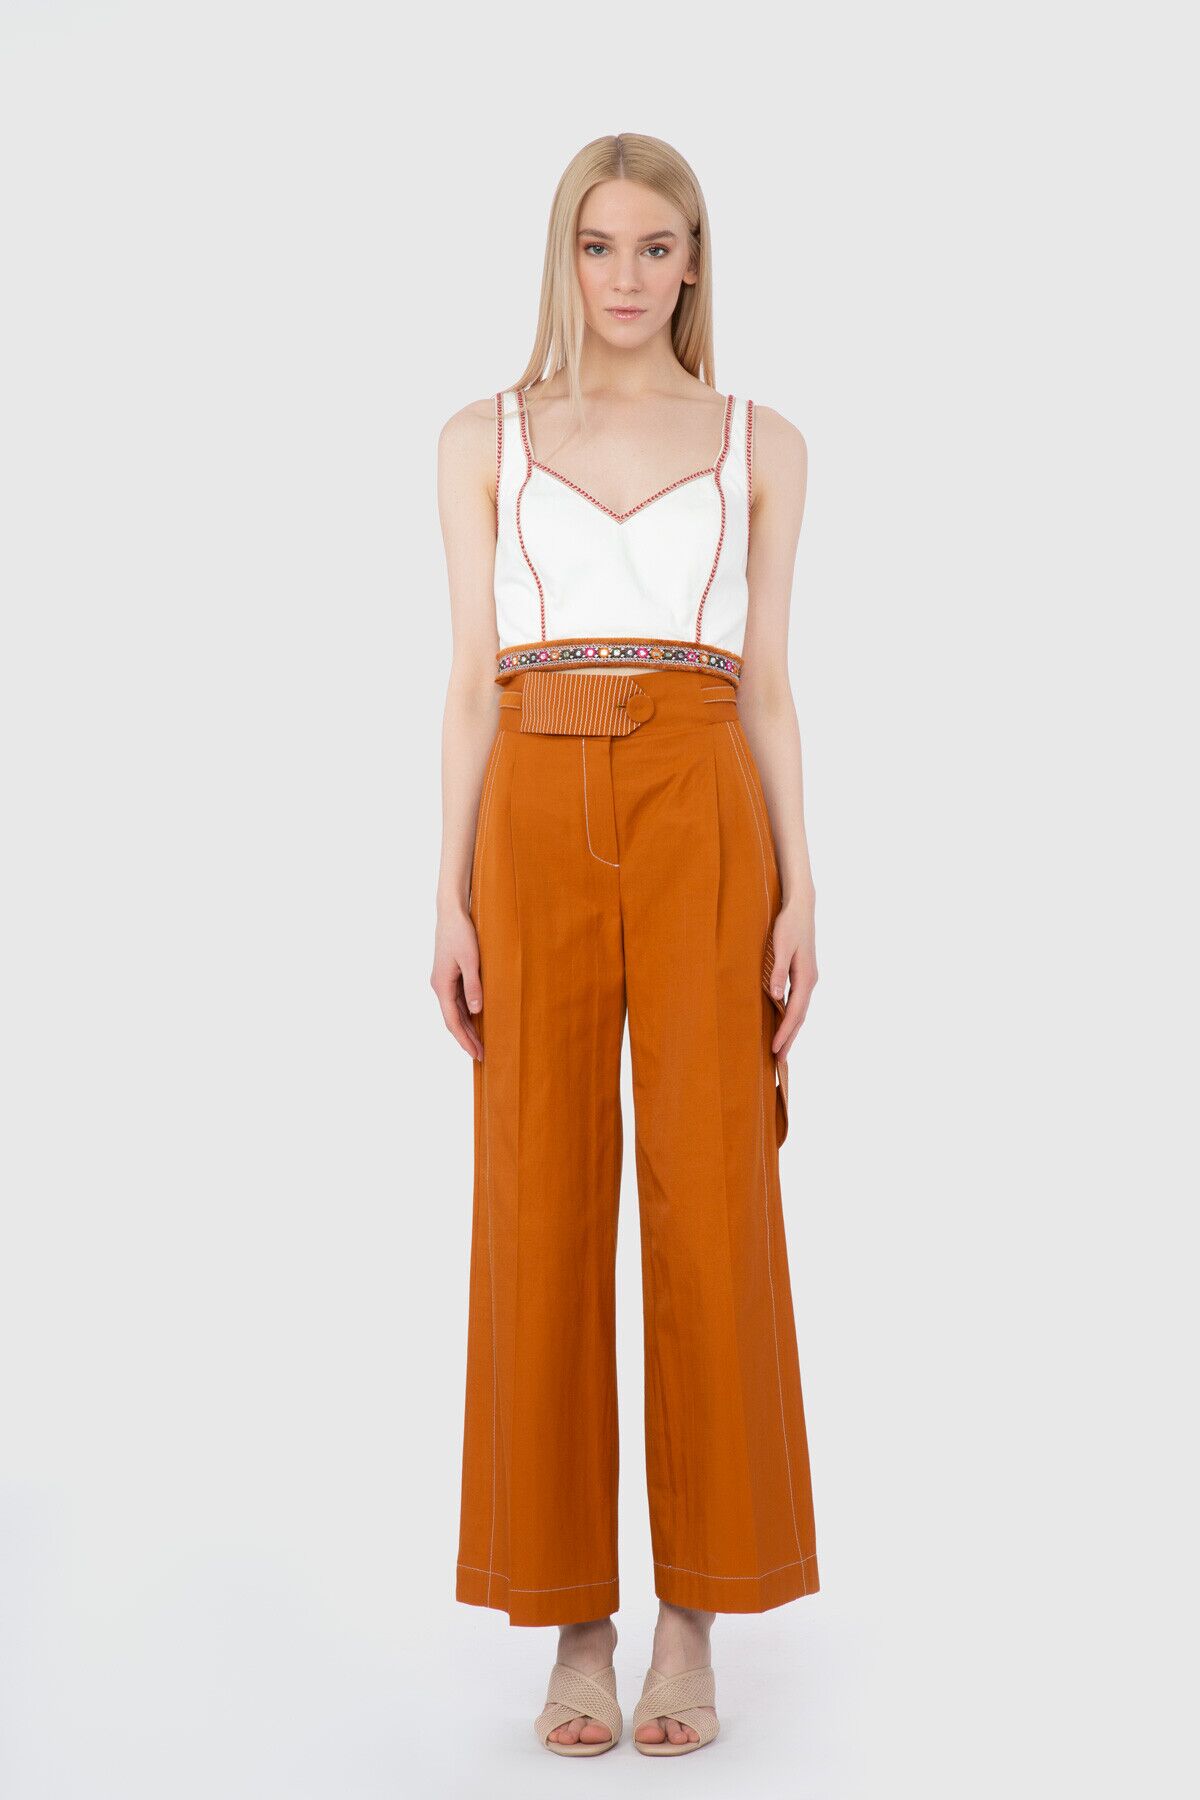  GIZIA - Contrast Stitch Detail High Waist Brown Trousers